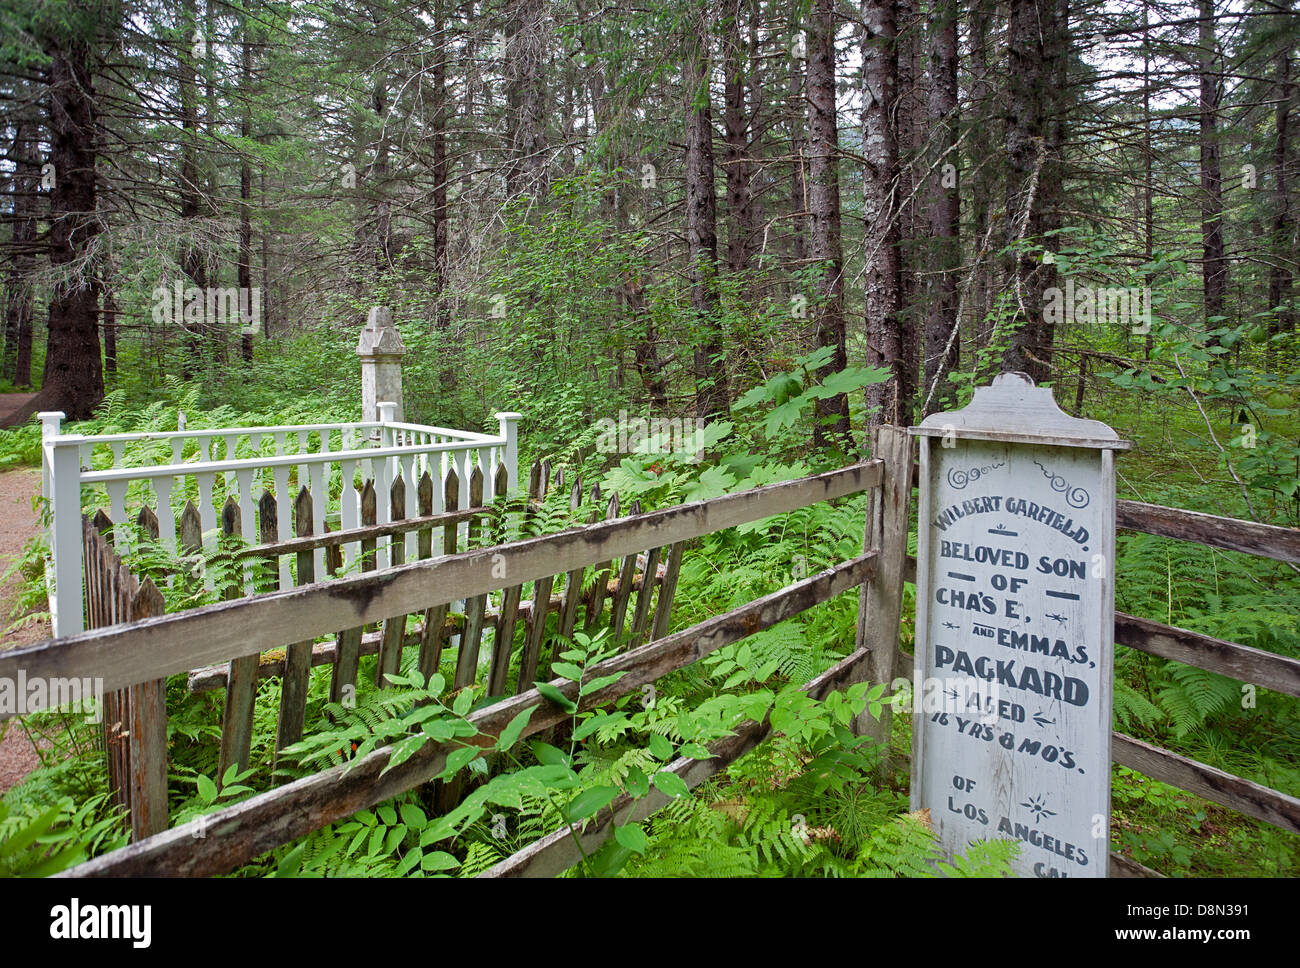 1898 avalanche cemetery. Dyea (ghost town). Chilkoot trail. Alaska. USA Stock Photo